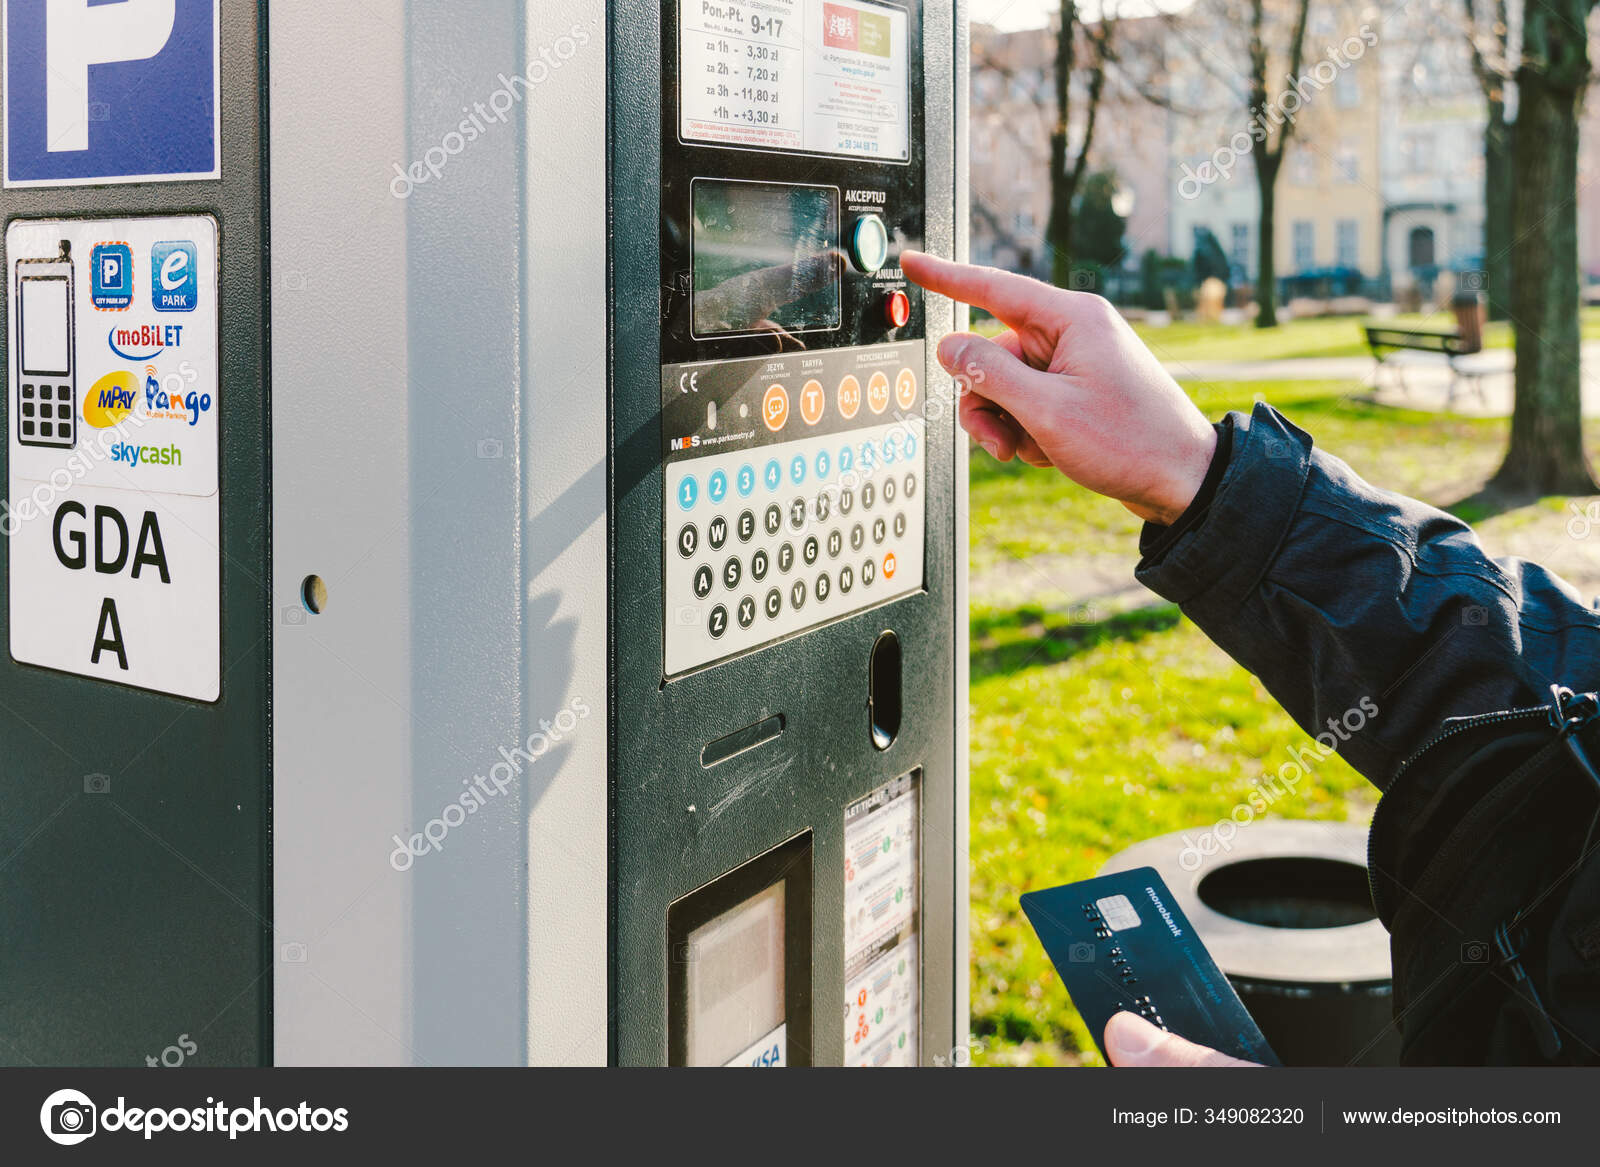 Automated Car Parking Ticket Machines. Editorial Image - Image of